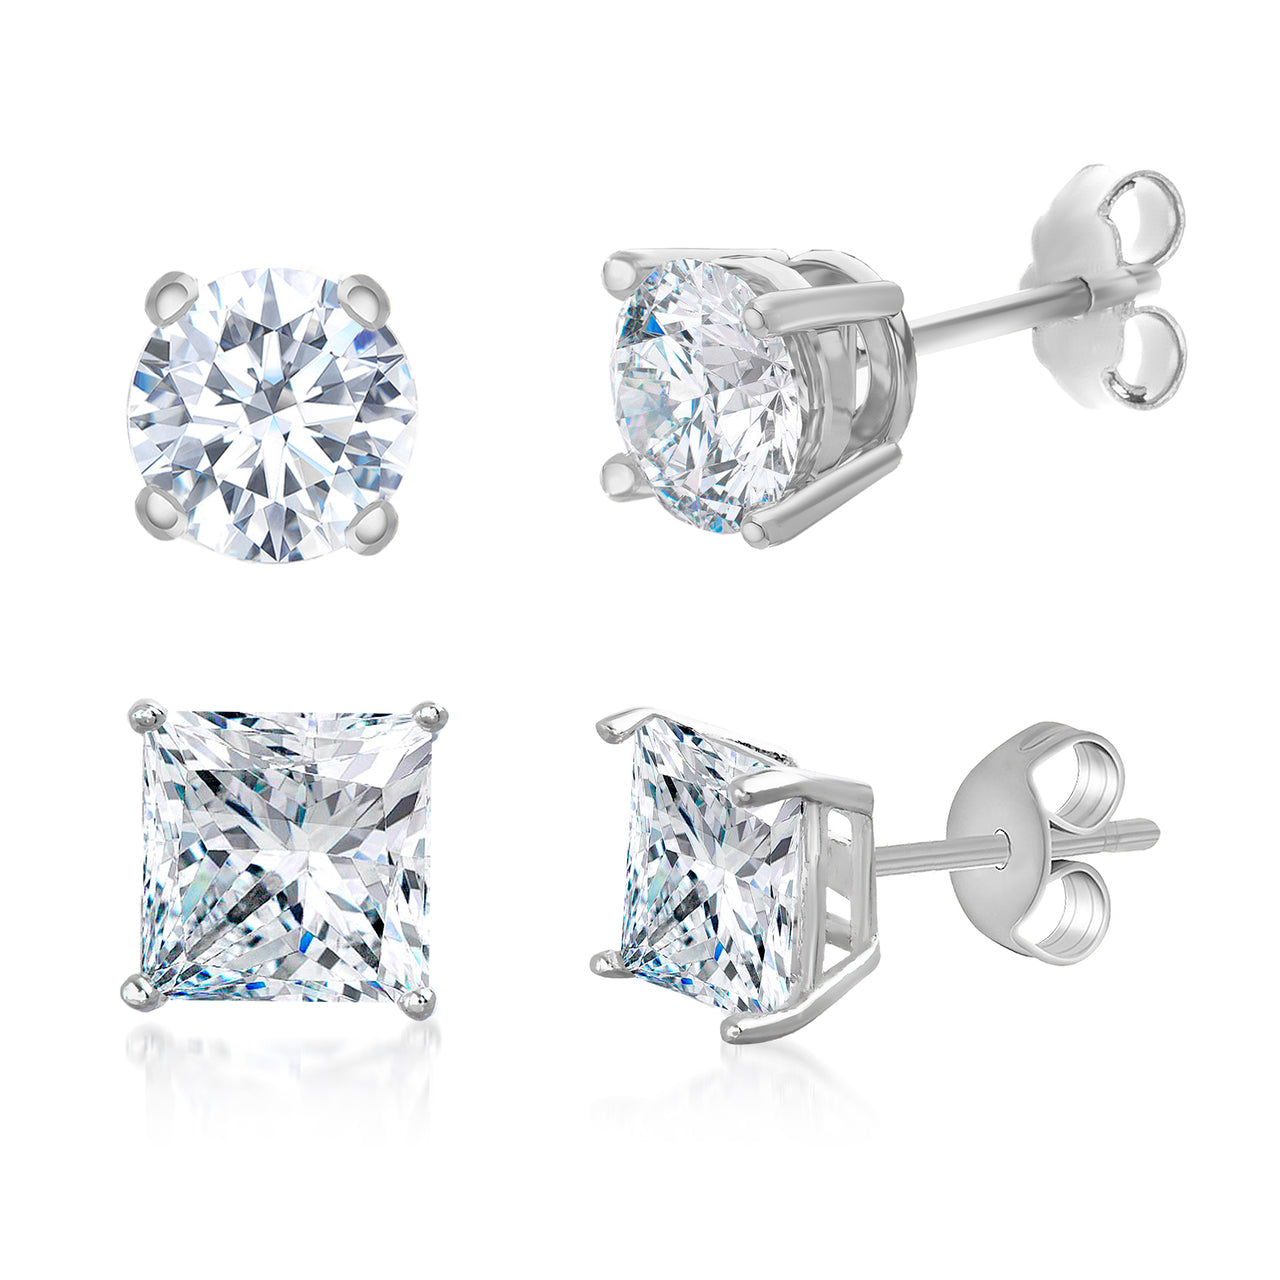 Lesa Michele 5mm Squared and 6mm Round Simulated Diamond Duo Post Earring Set in Rhodium Plated Sterling Silver